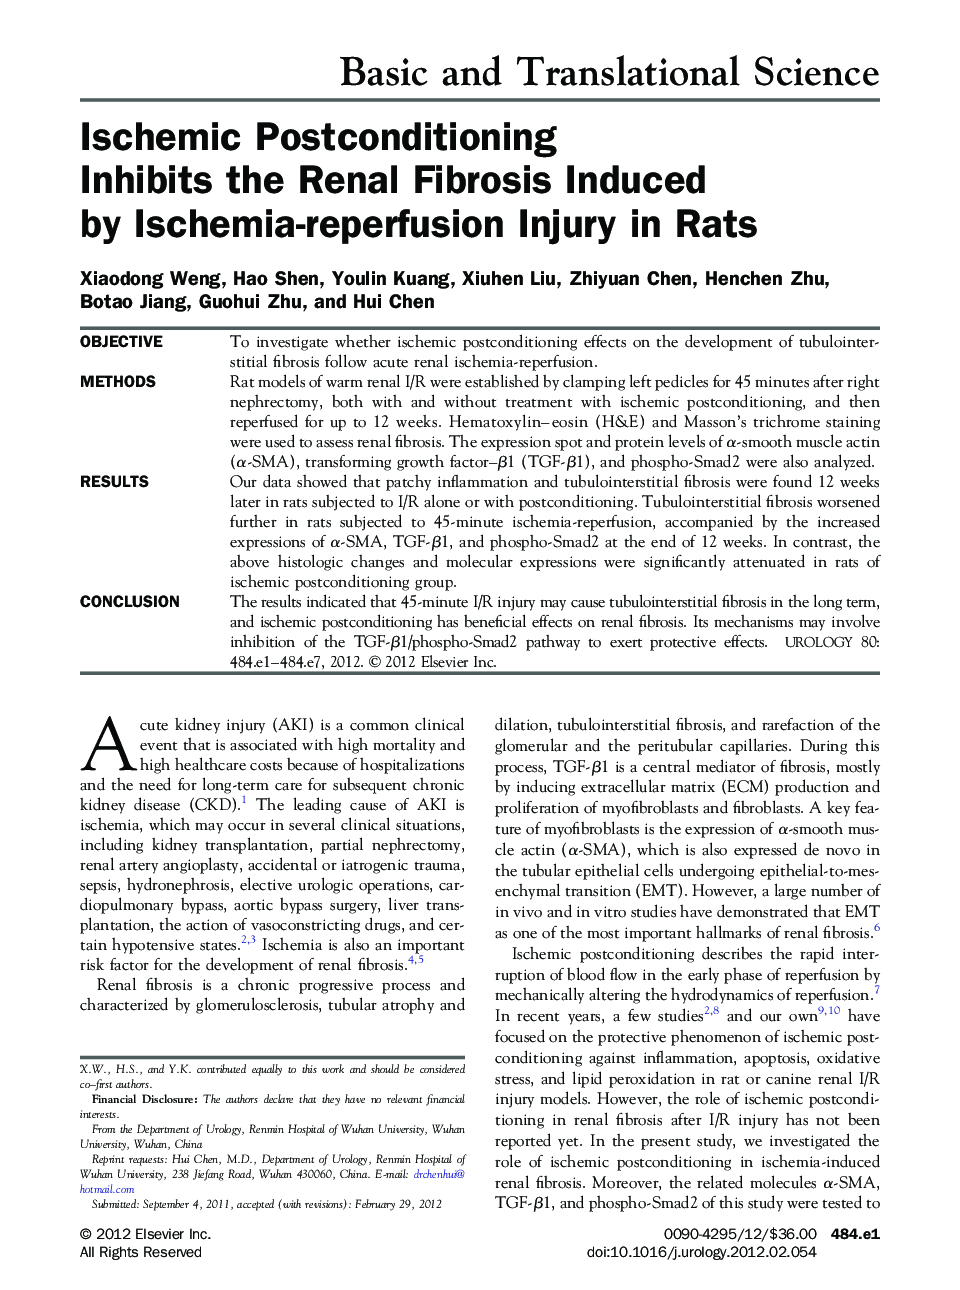 Ischemic Postconditioning Inhibits the Renal Fibrosis Induced by Ischemia-reperfusion Injury in Rats